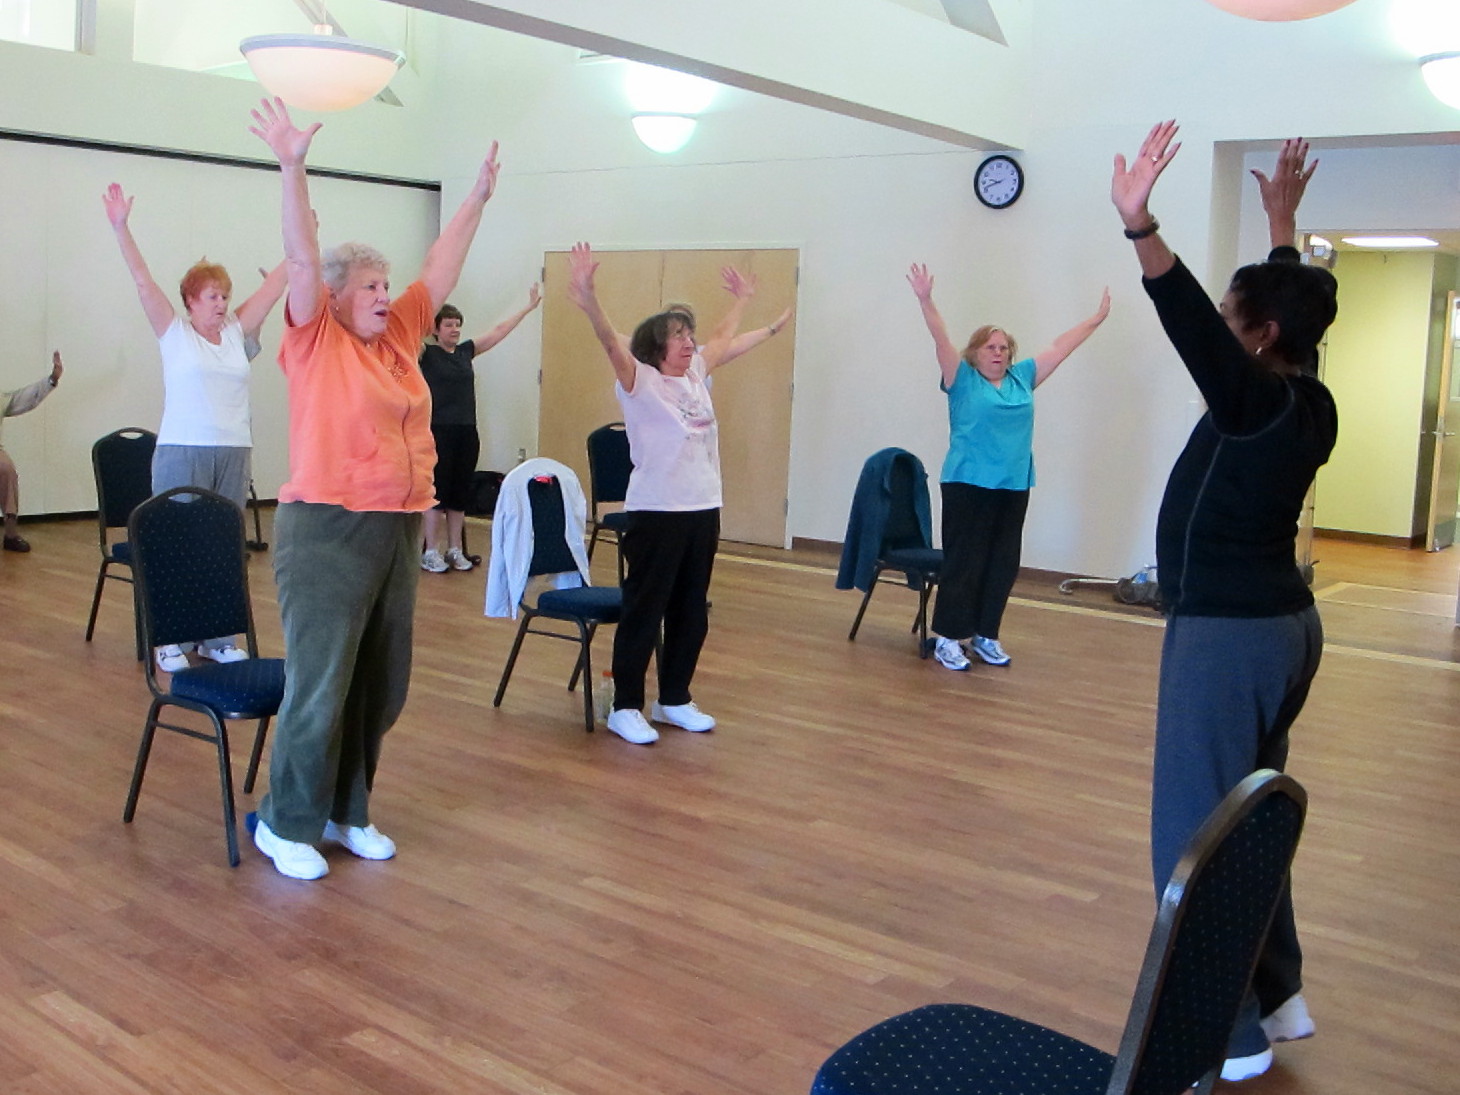 Participants take part in an exercise class at the Lourie Center, a senior center in Columbia, S.C.